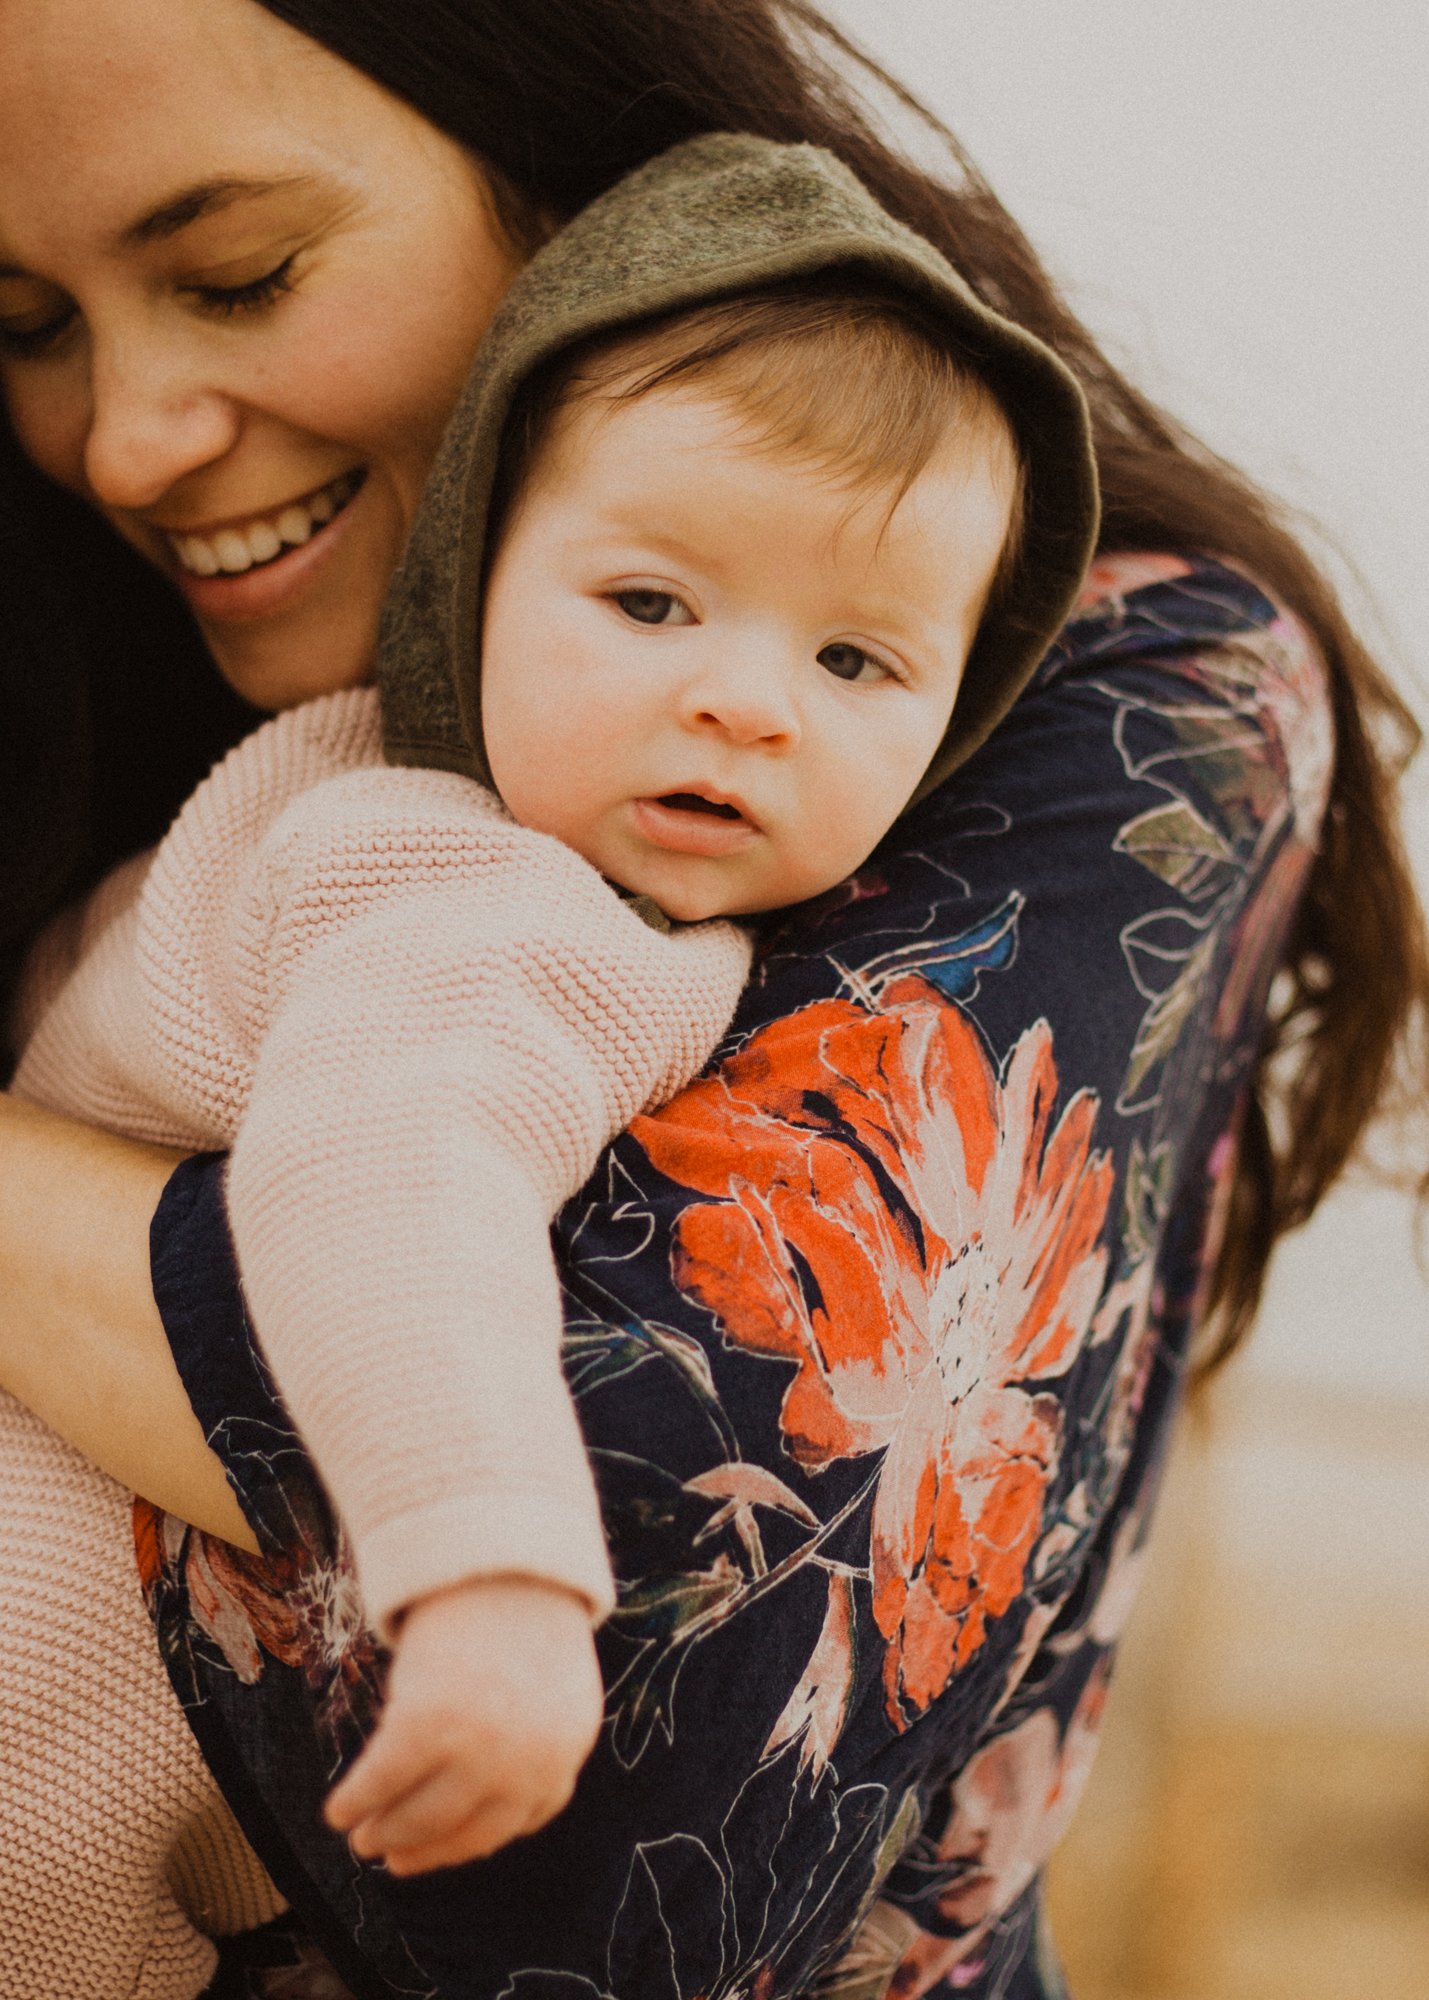 Smiling mother in floral shirt, holding newborn baby in a hooded sweater.